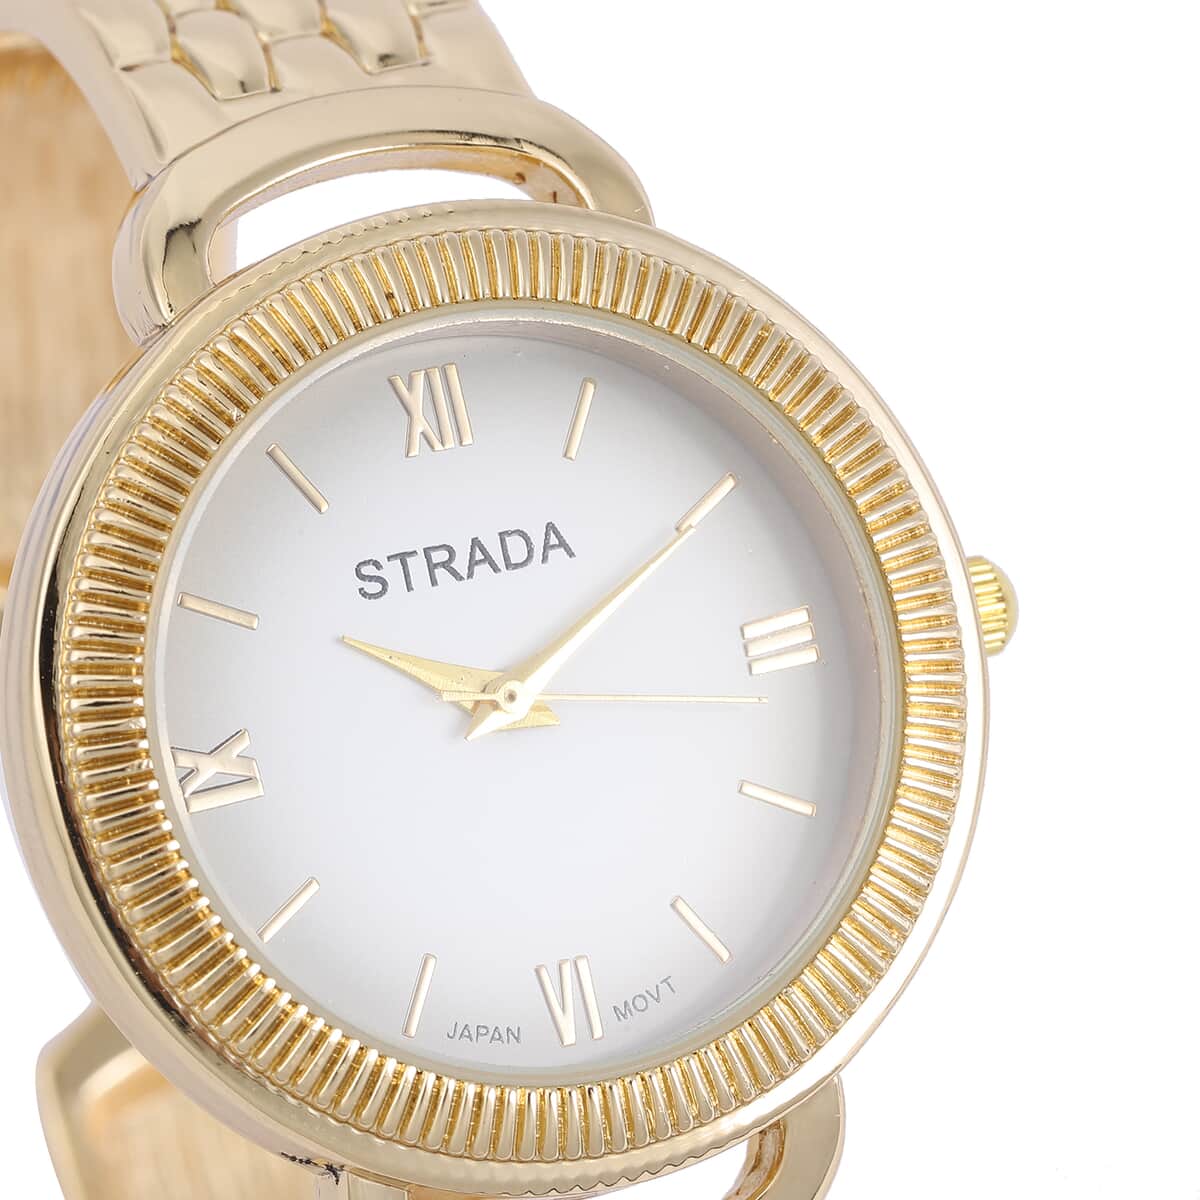 STRADA Japanese Movement Bangle Watch with Black Dial in Goldtone (6.5-7.0In) image number 3